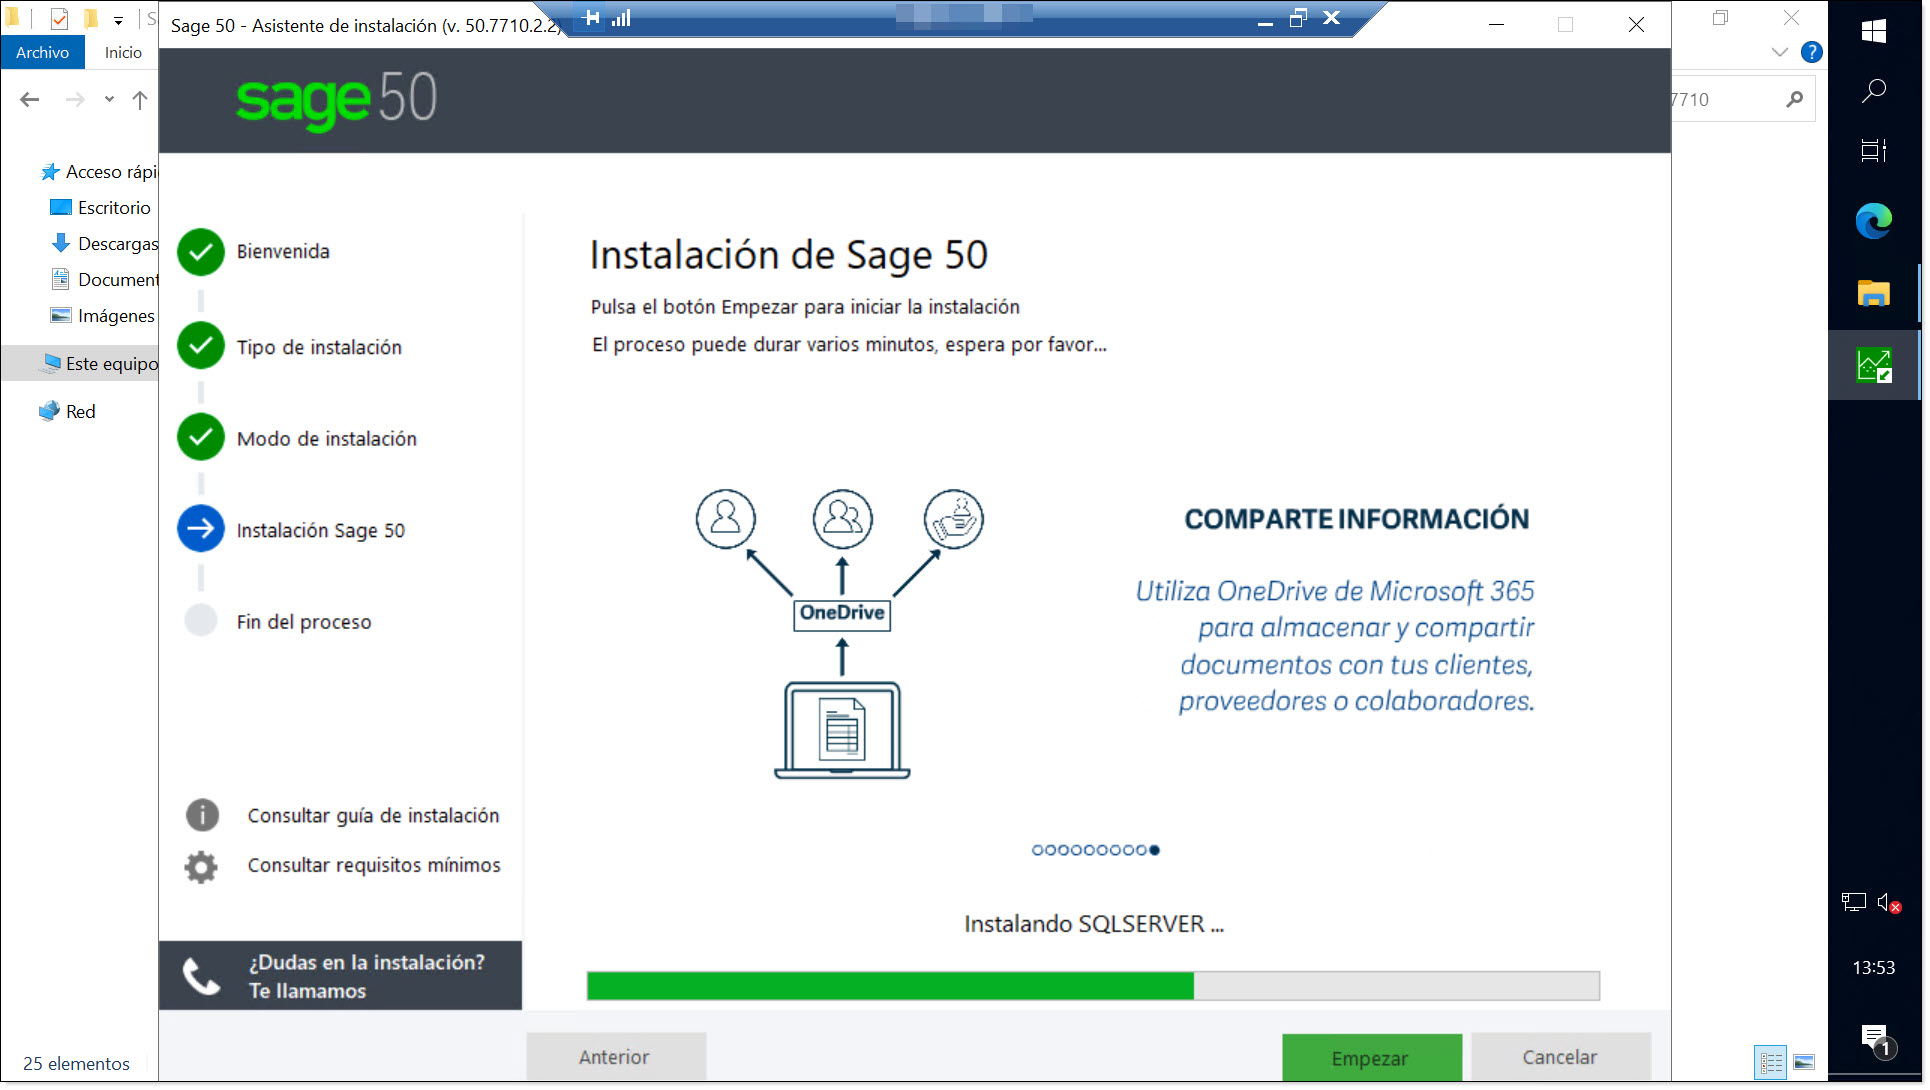 Part 1 - Sage 50 will install Microsoft SQL Server to manage the application data